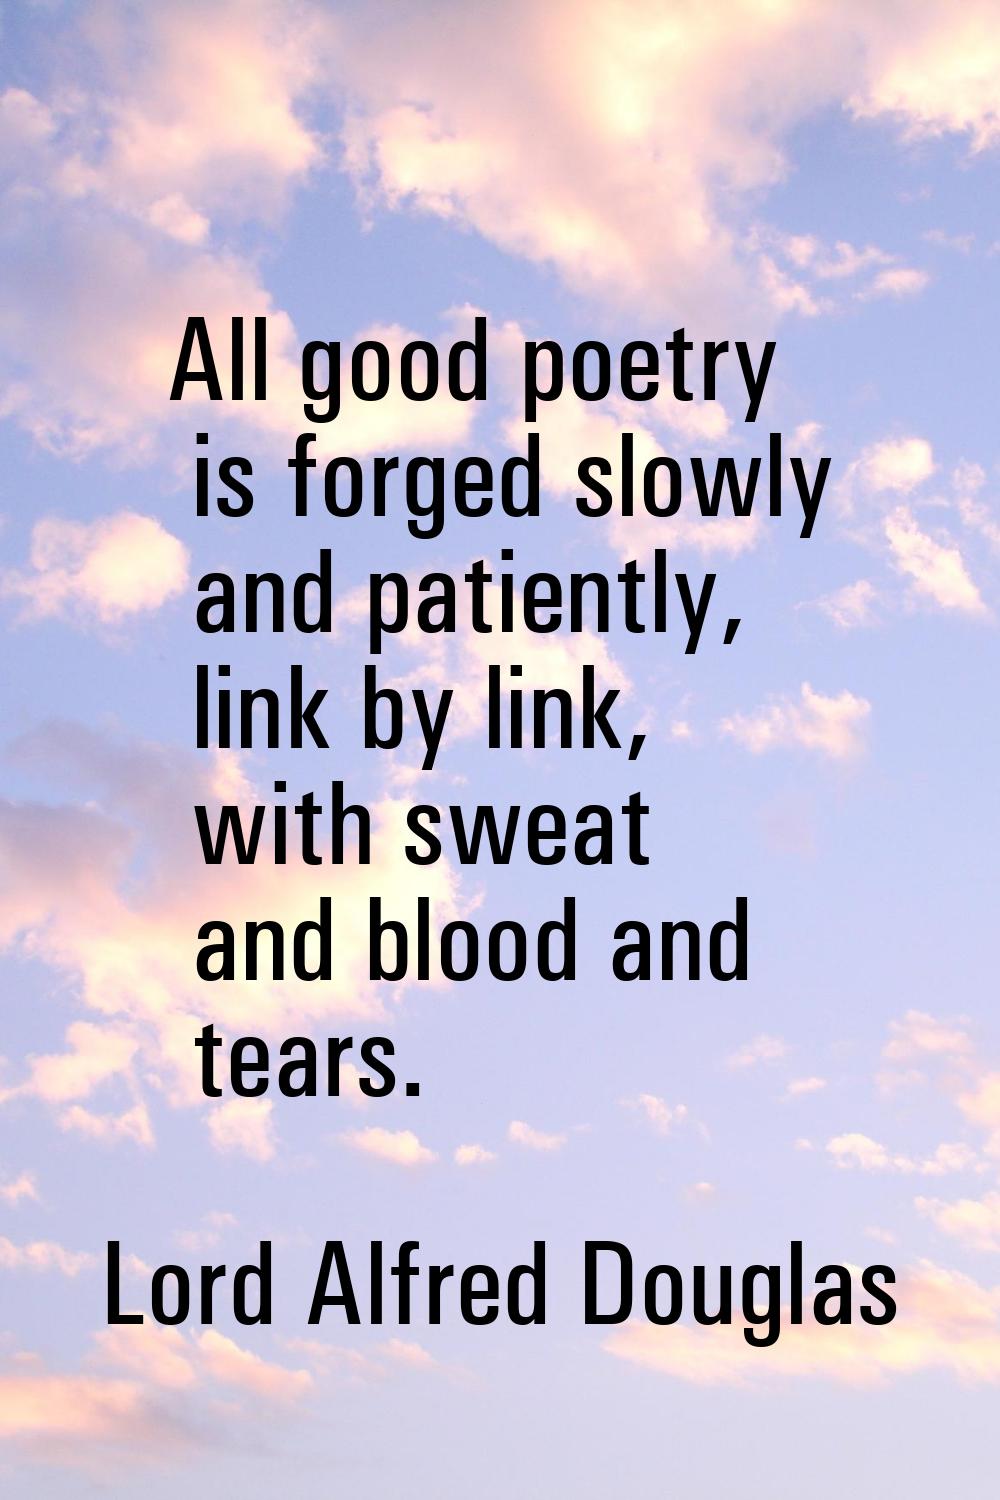 All good poetry is forged slowly and patiently, link by link, with sweat and blood and tears.